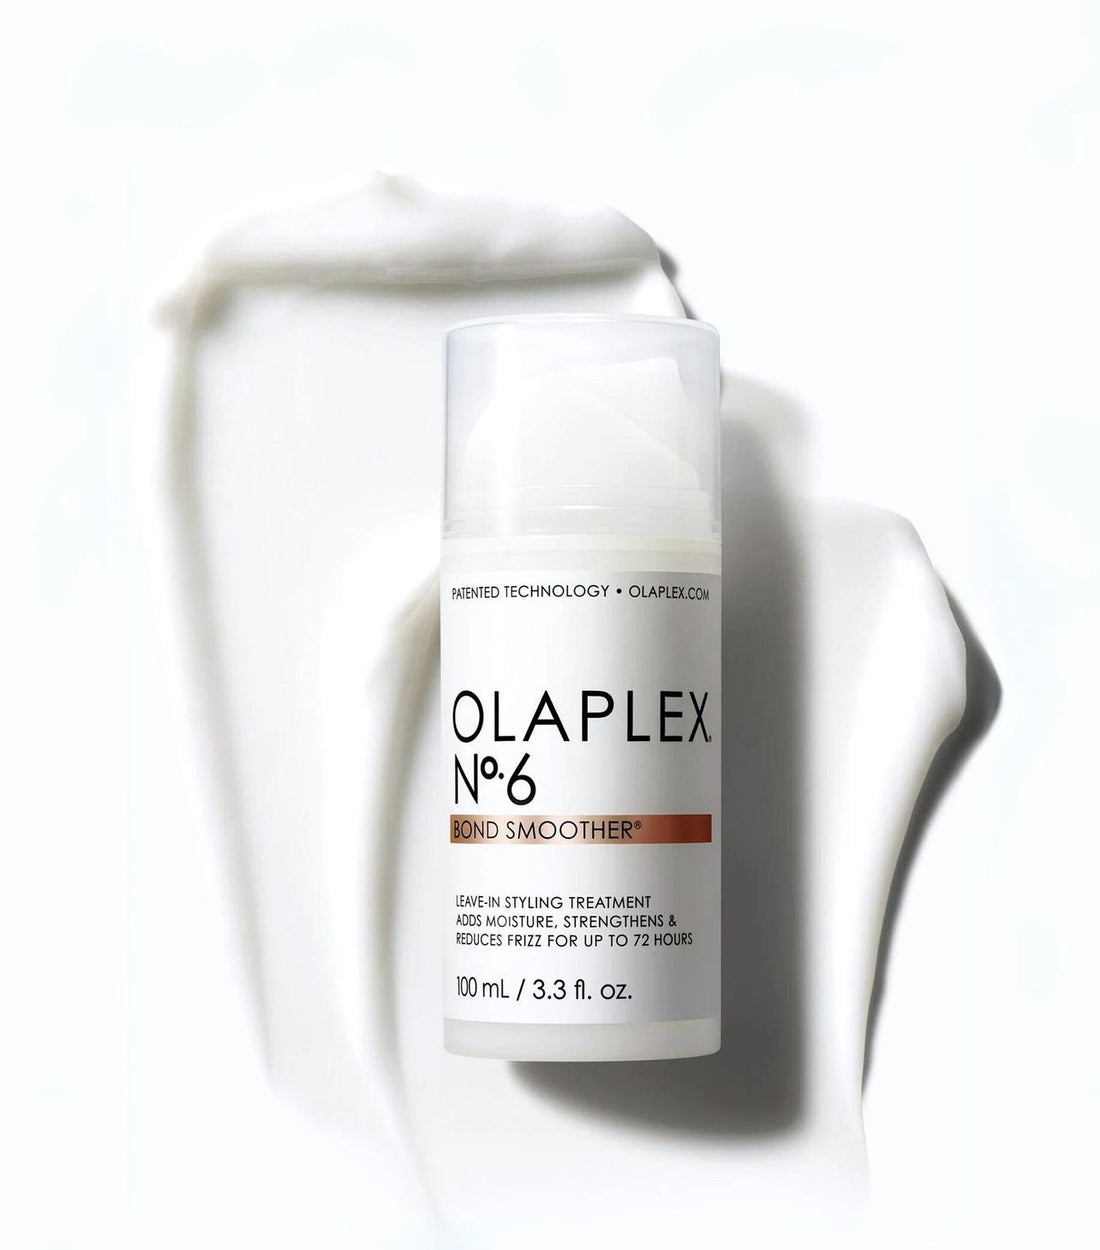 Olaplex Bond Smoother Leave-in Styling Treatment No. 6 100ml